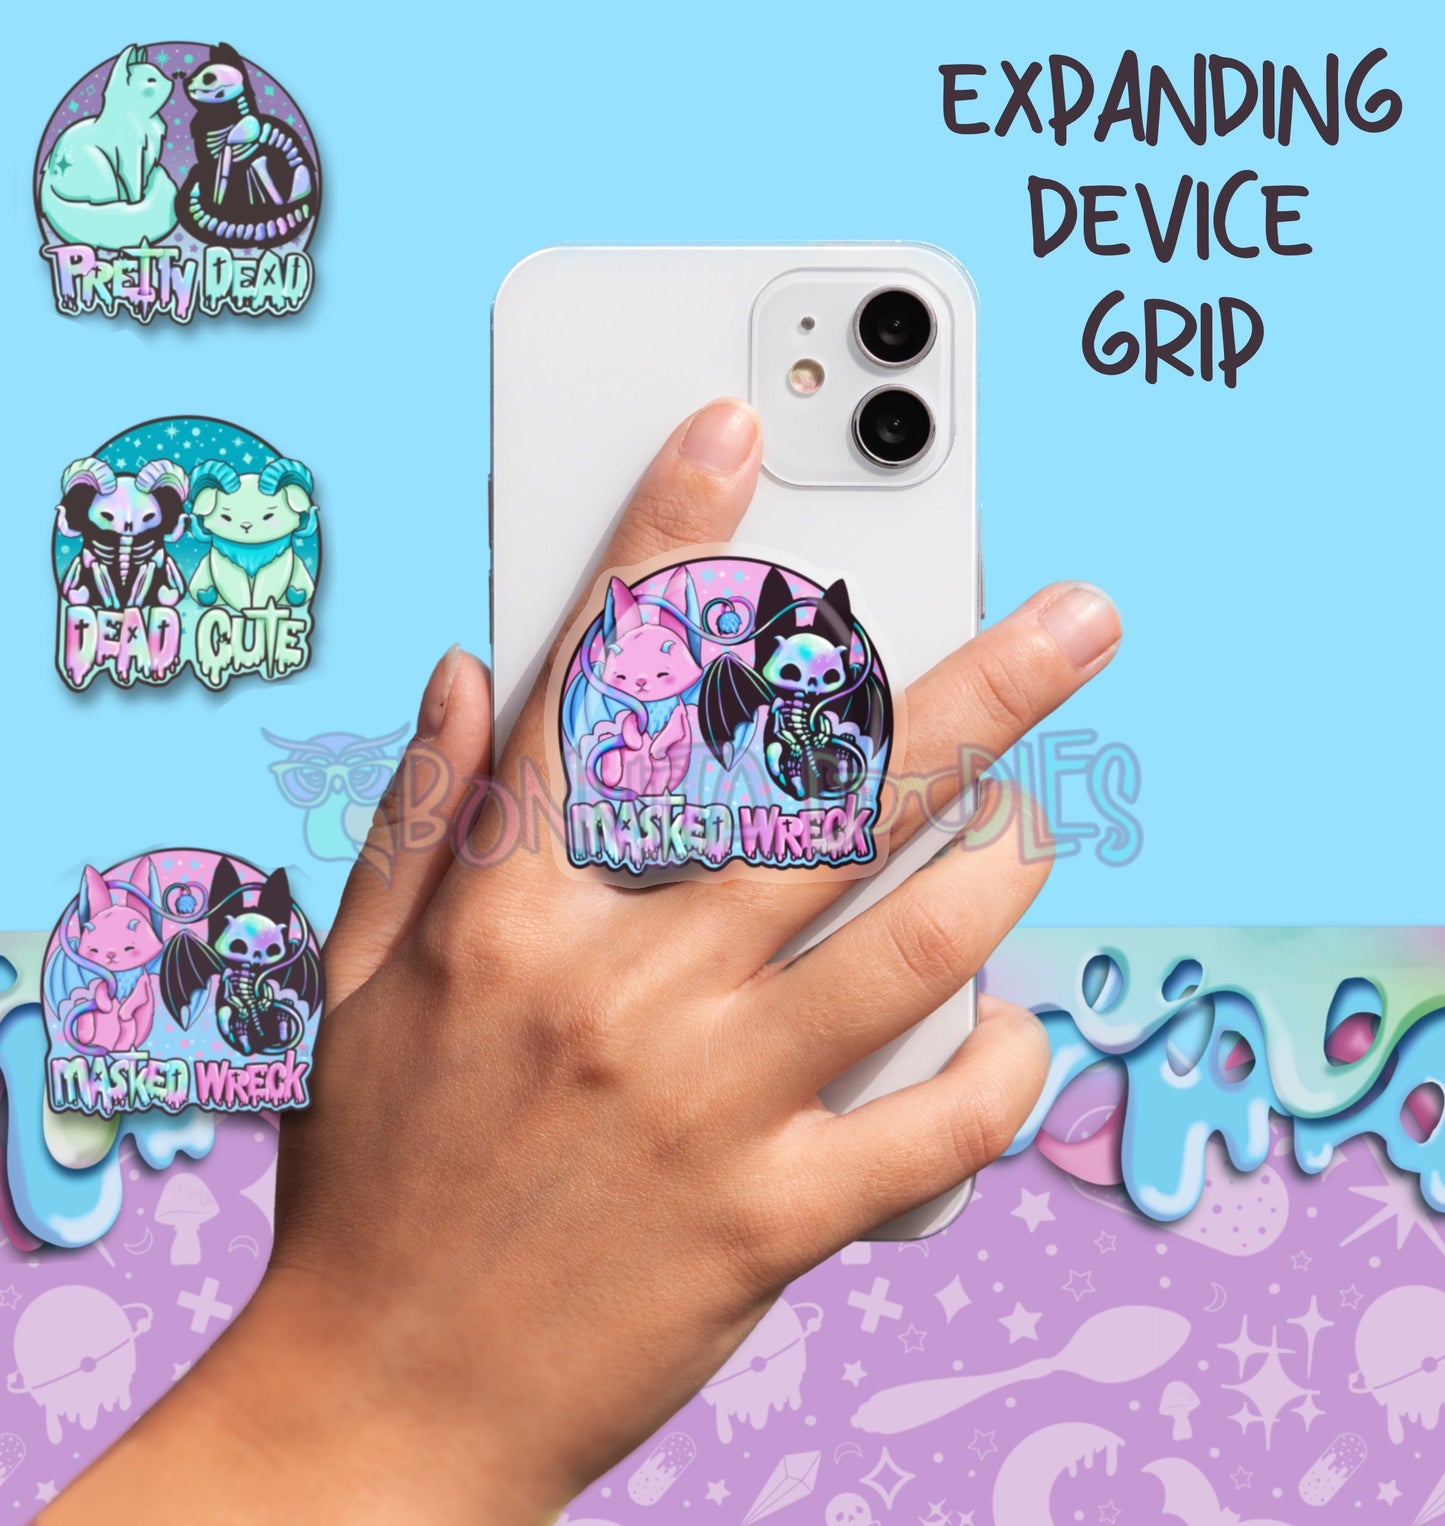 B GRADE Phone/device Grip - 3 designs available